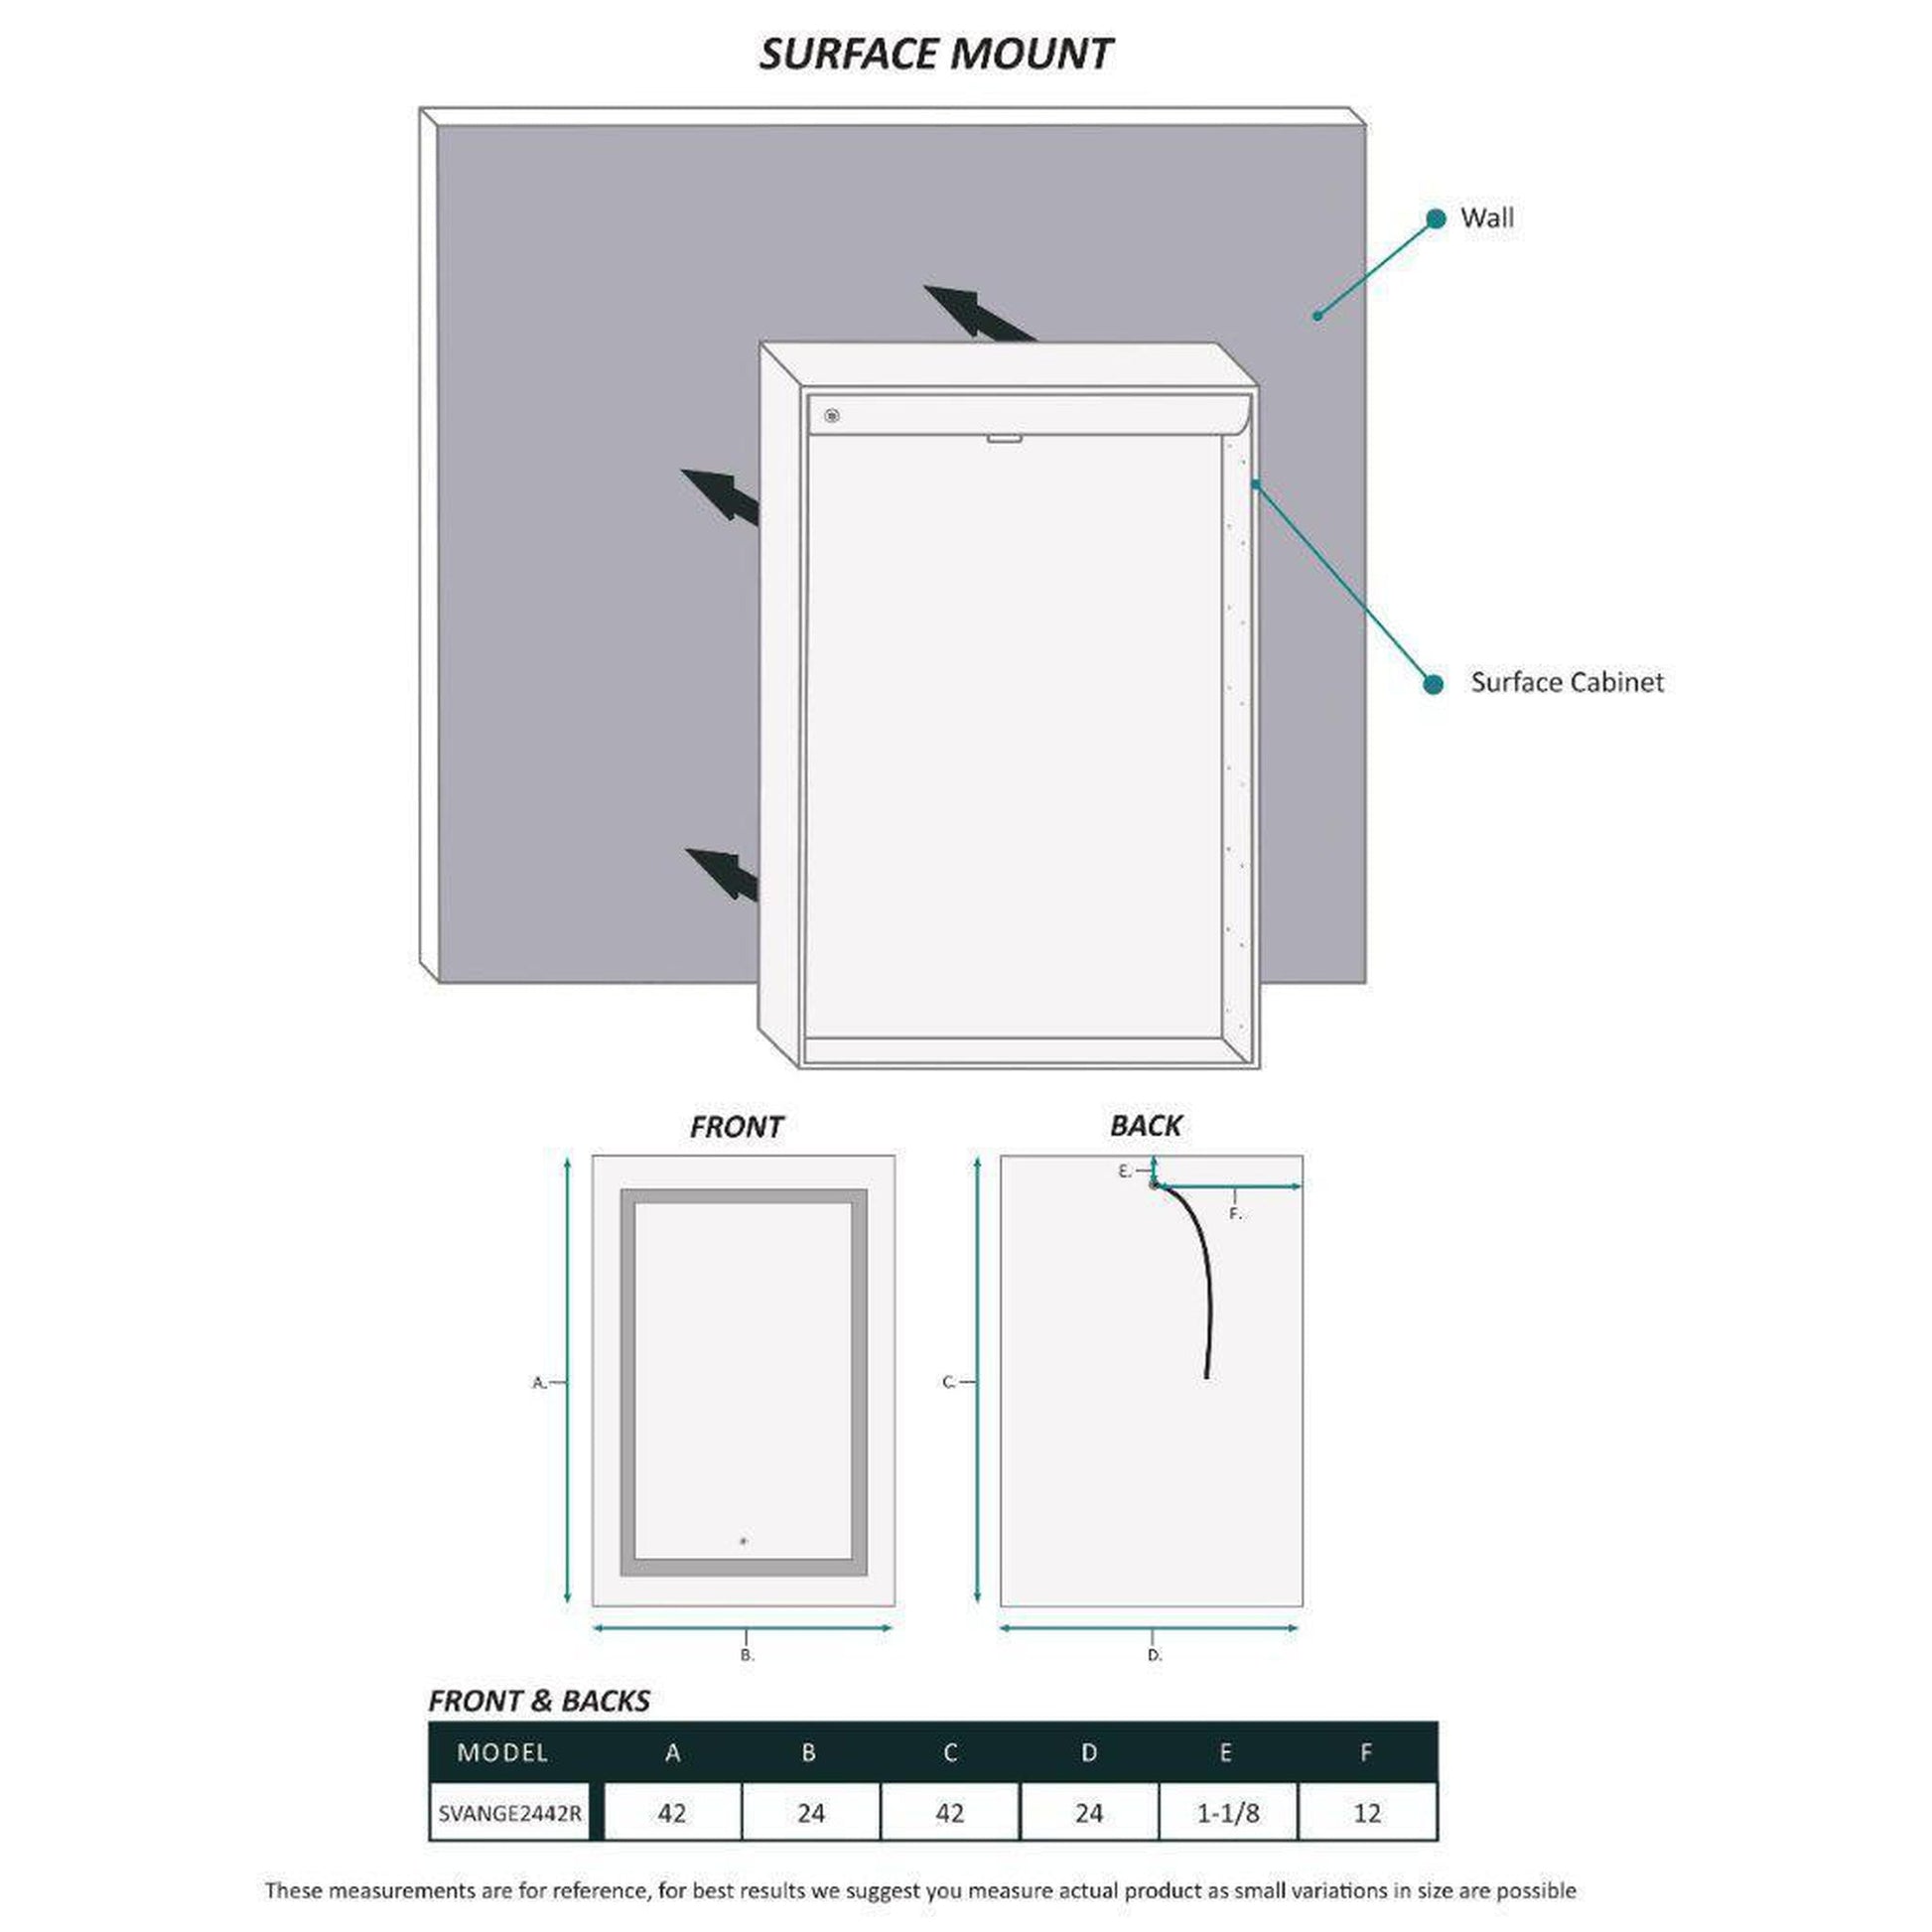 Krugg Reflections Svange 24" x 42" 5000K Single Right Opening Rectangular Recessed/Surface-Mount Illuminated Silver Backed LED Medicine Cabinet Mirror With Built-in Defogger, Dimmer and Electrical Outlet